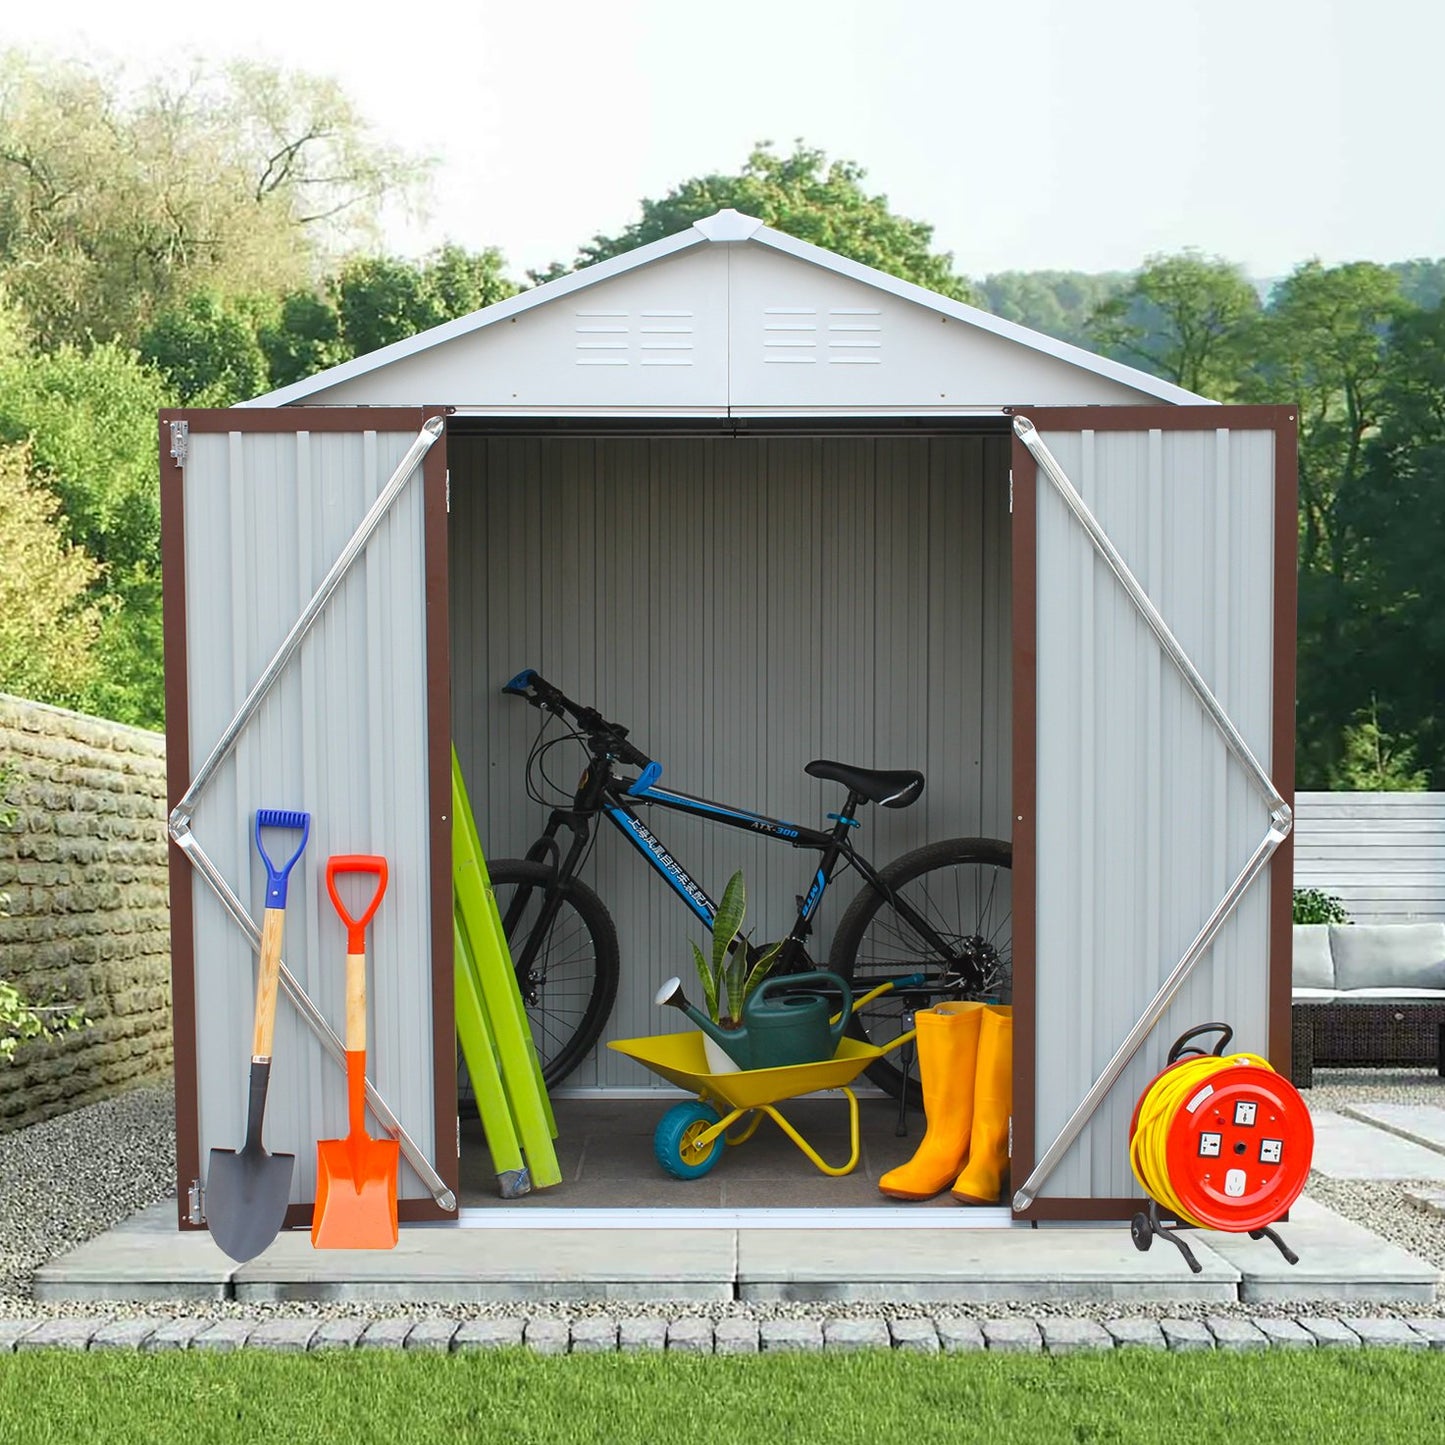 Outdoor Shed Storage Cabinet, 6FT X 4FT Garden Storage Shed Metal with Lockable Doors, Outside Vertical Shed Bike Shed